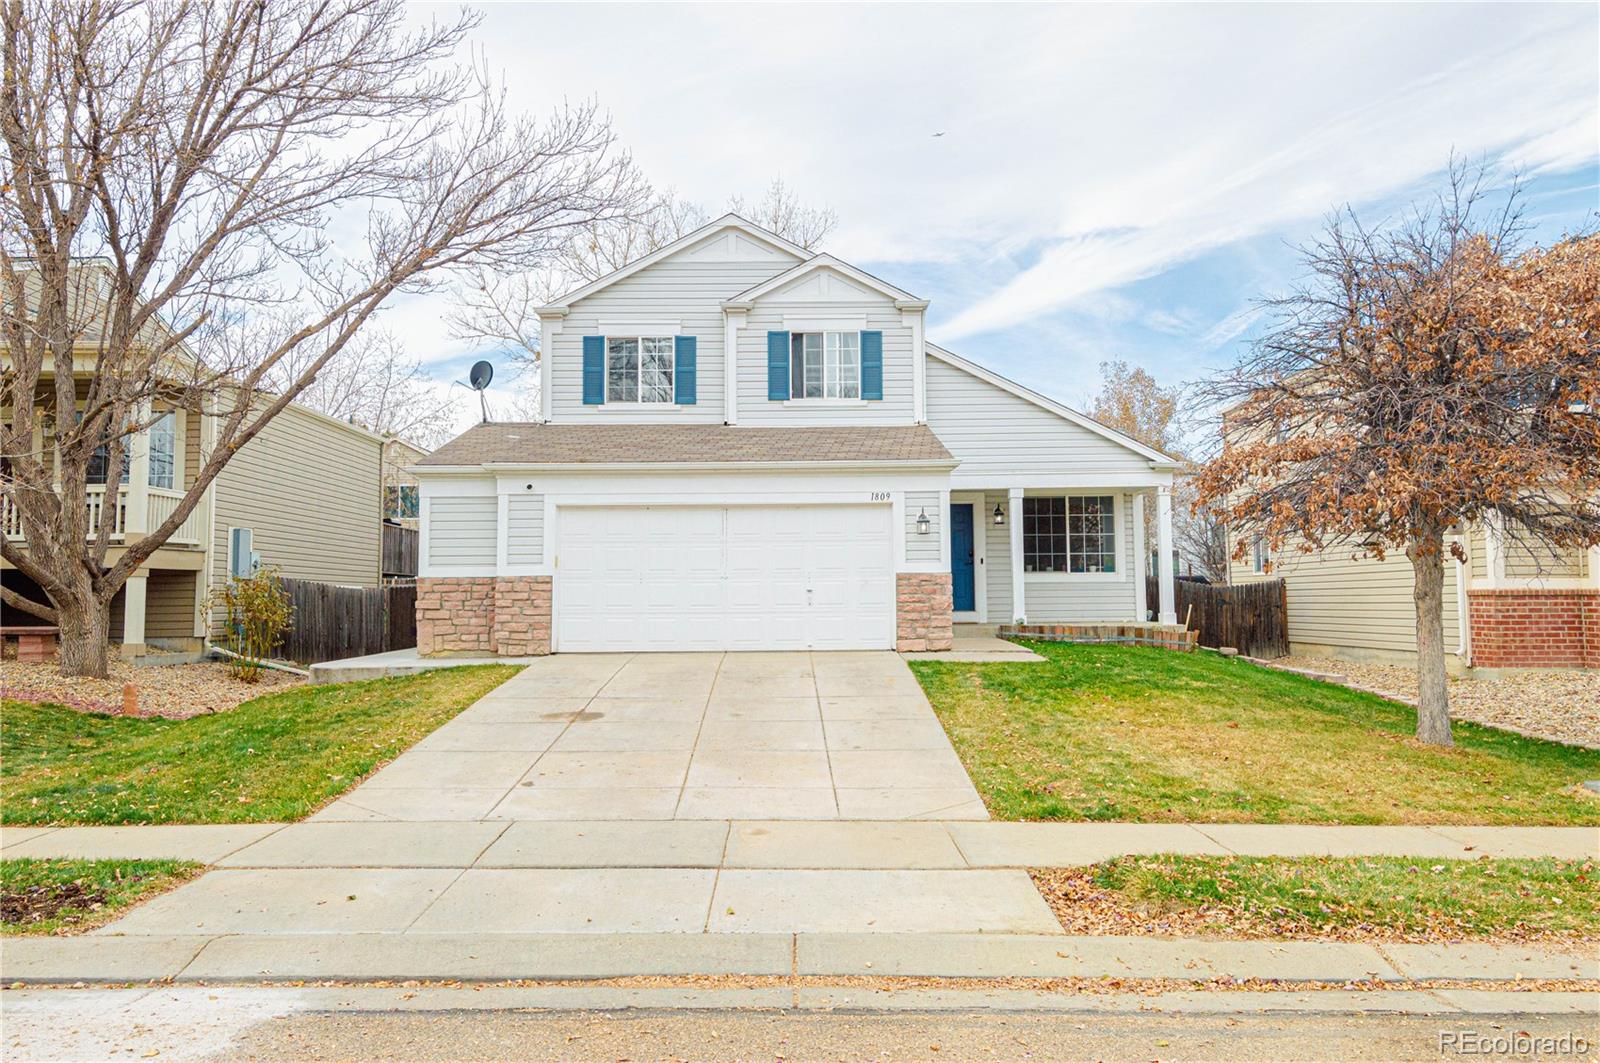 1809  clover creek drive, longmont sold home. Closed on 2024-04-26 for $590,000.